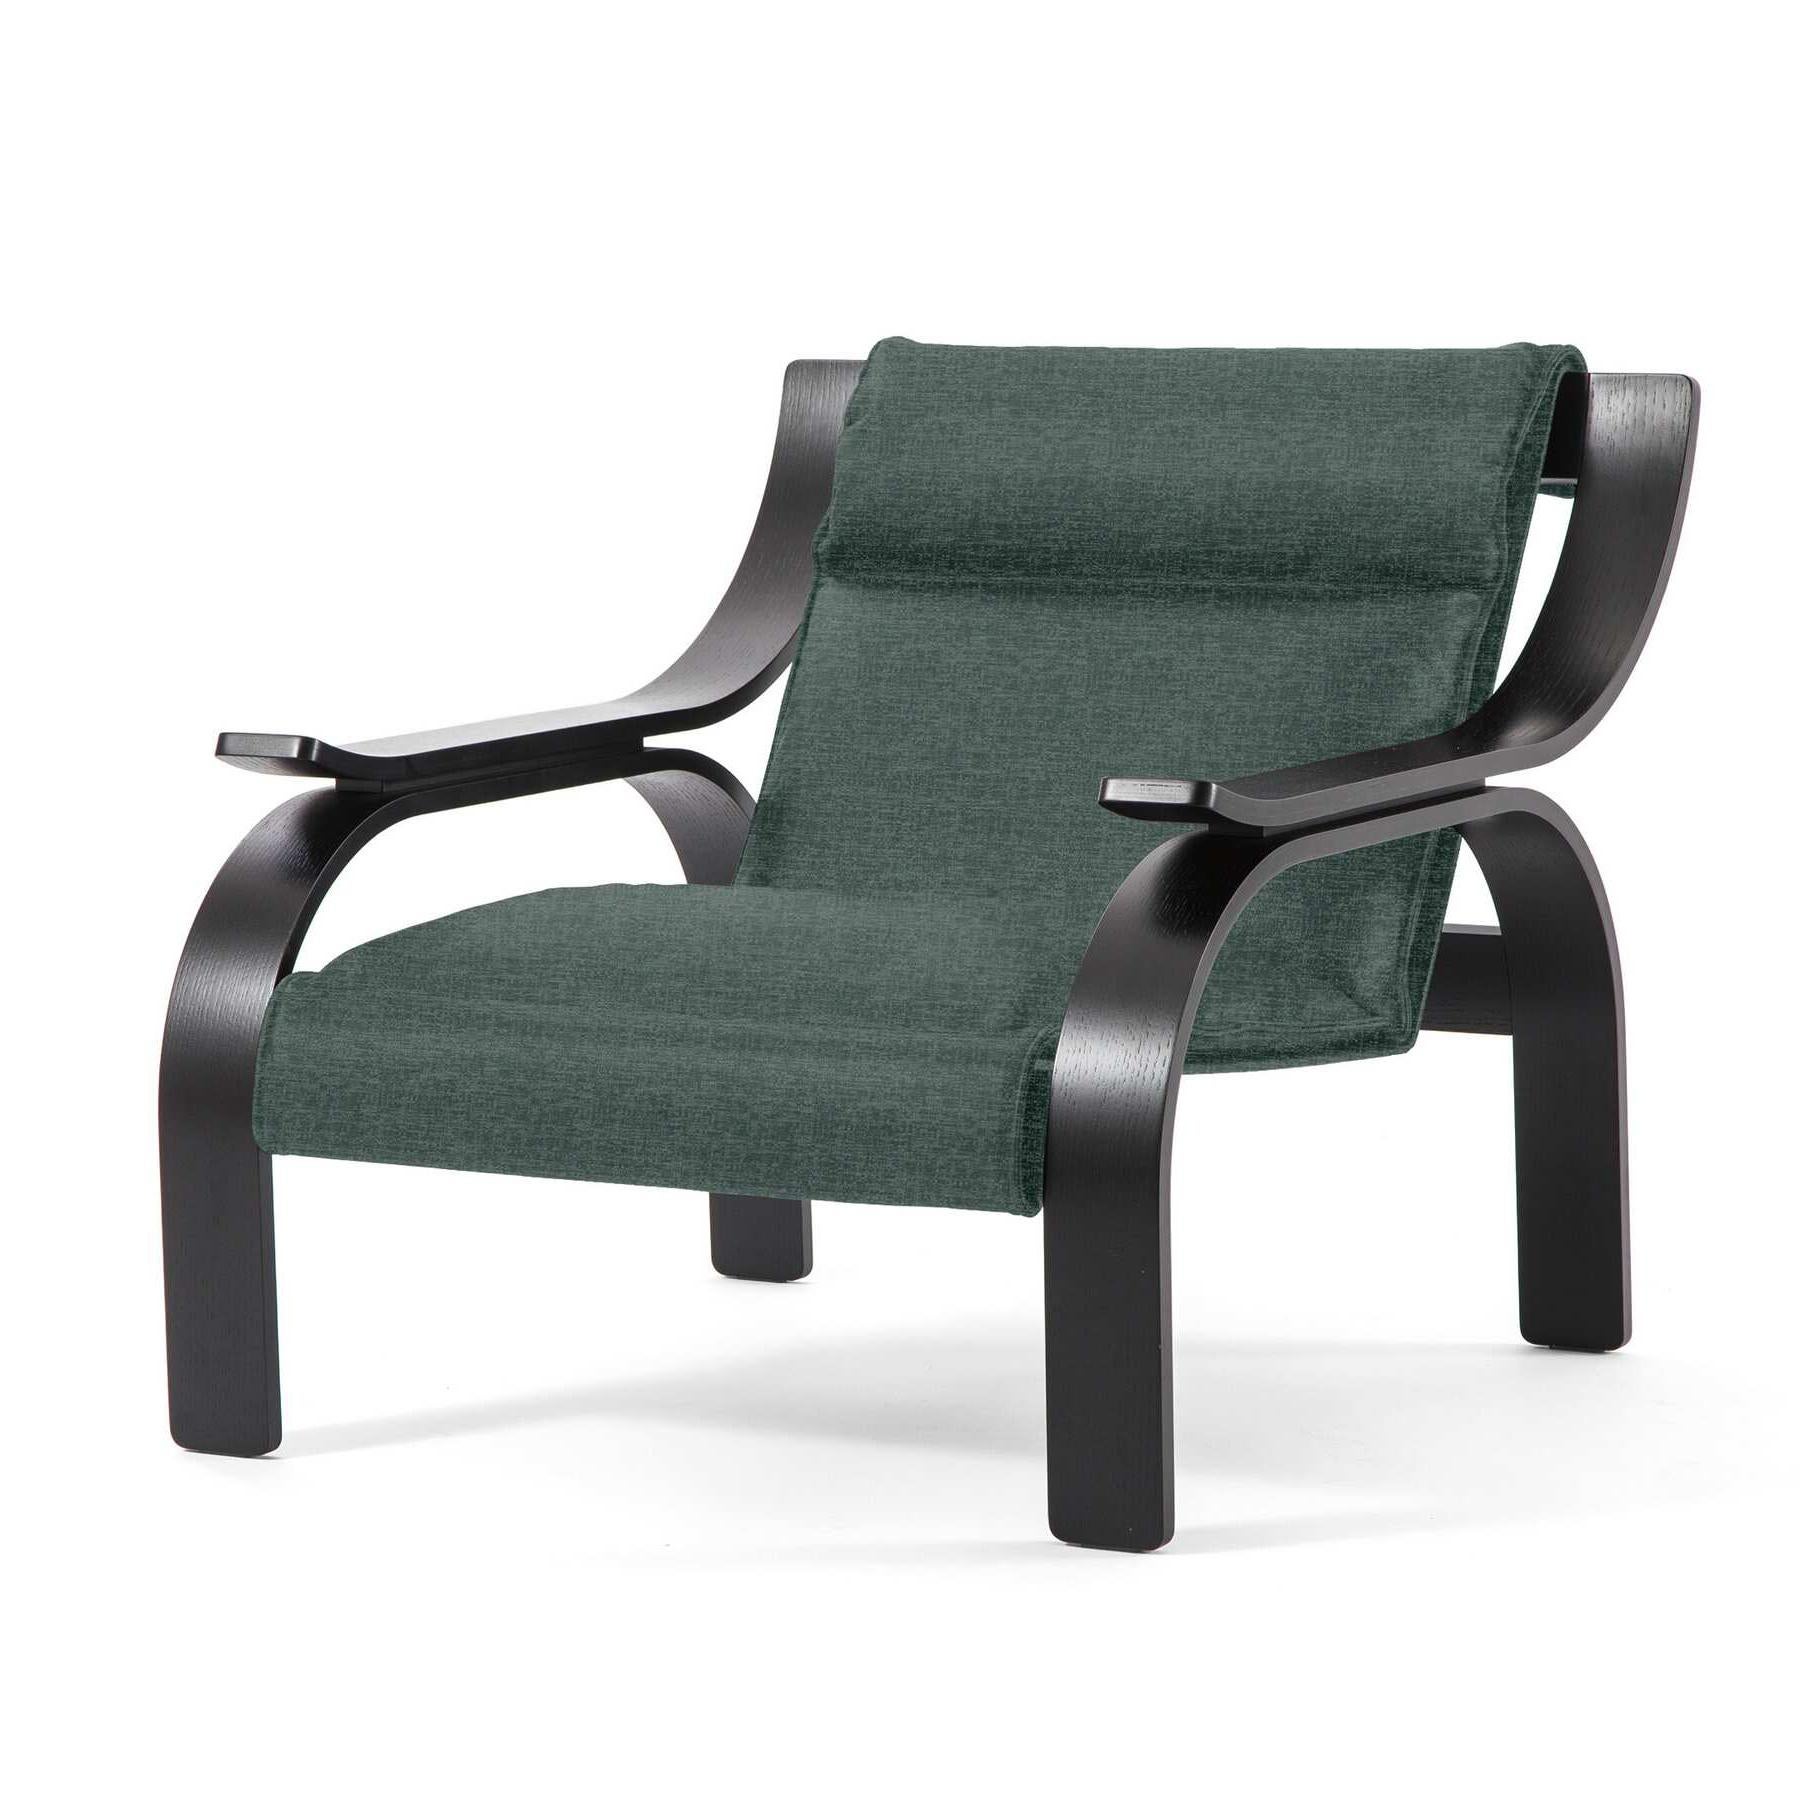 Woodline armchair designed by Marco Zanuso in 1964, relaunched in 2015.

Green fabric and black stained wood.

Manufactured by Cassina in Italy.

An armchair with a striking, rigorous design, the outcome of research by Marco Zanuso on how to